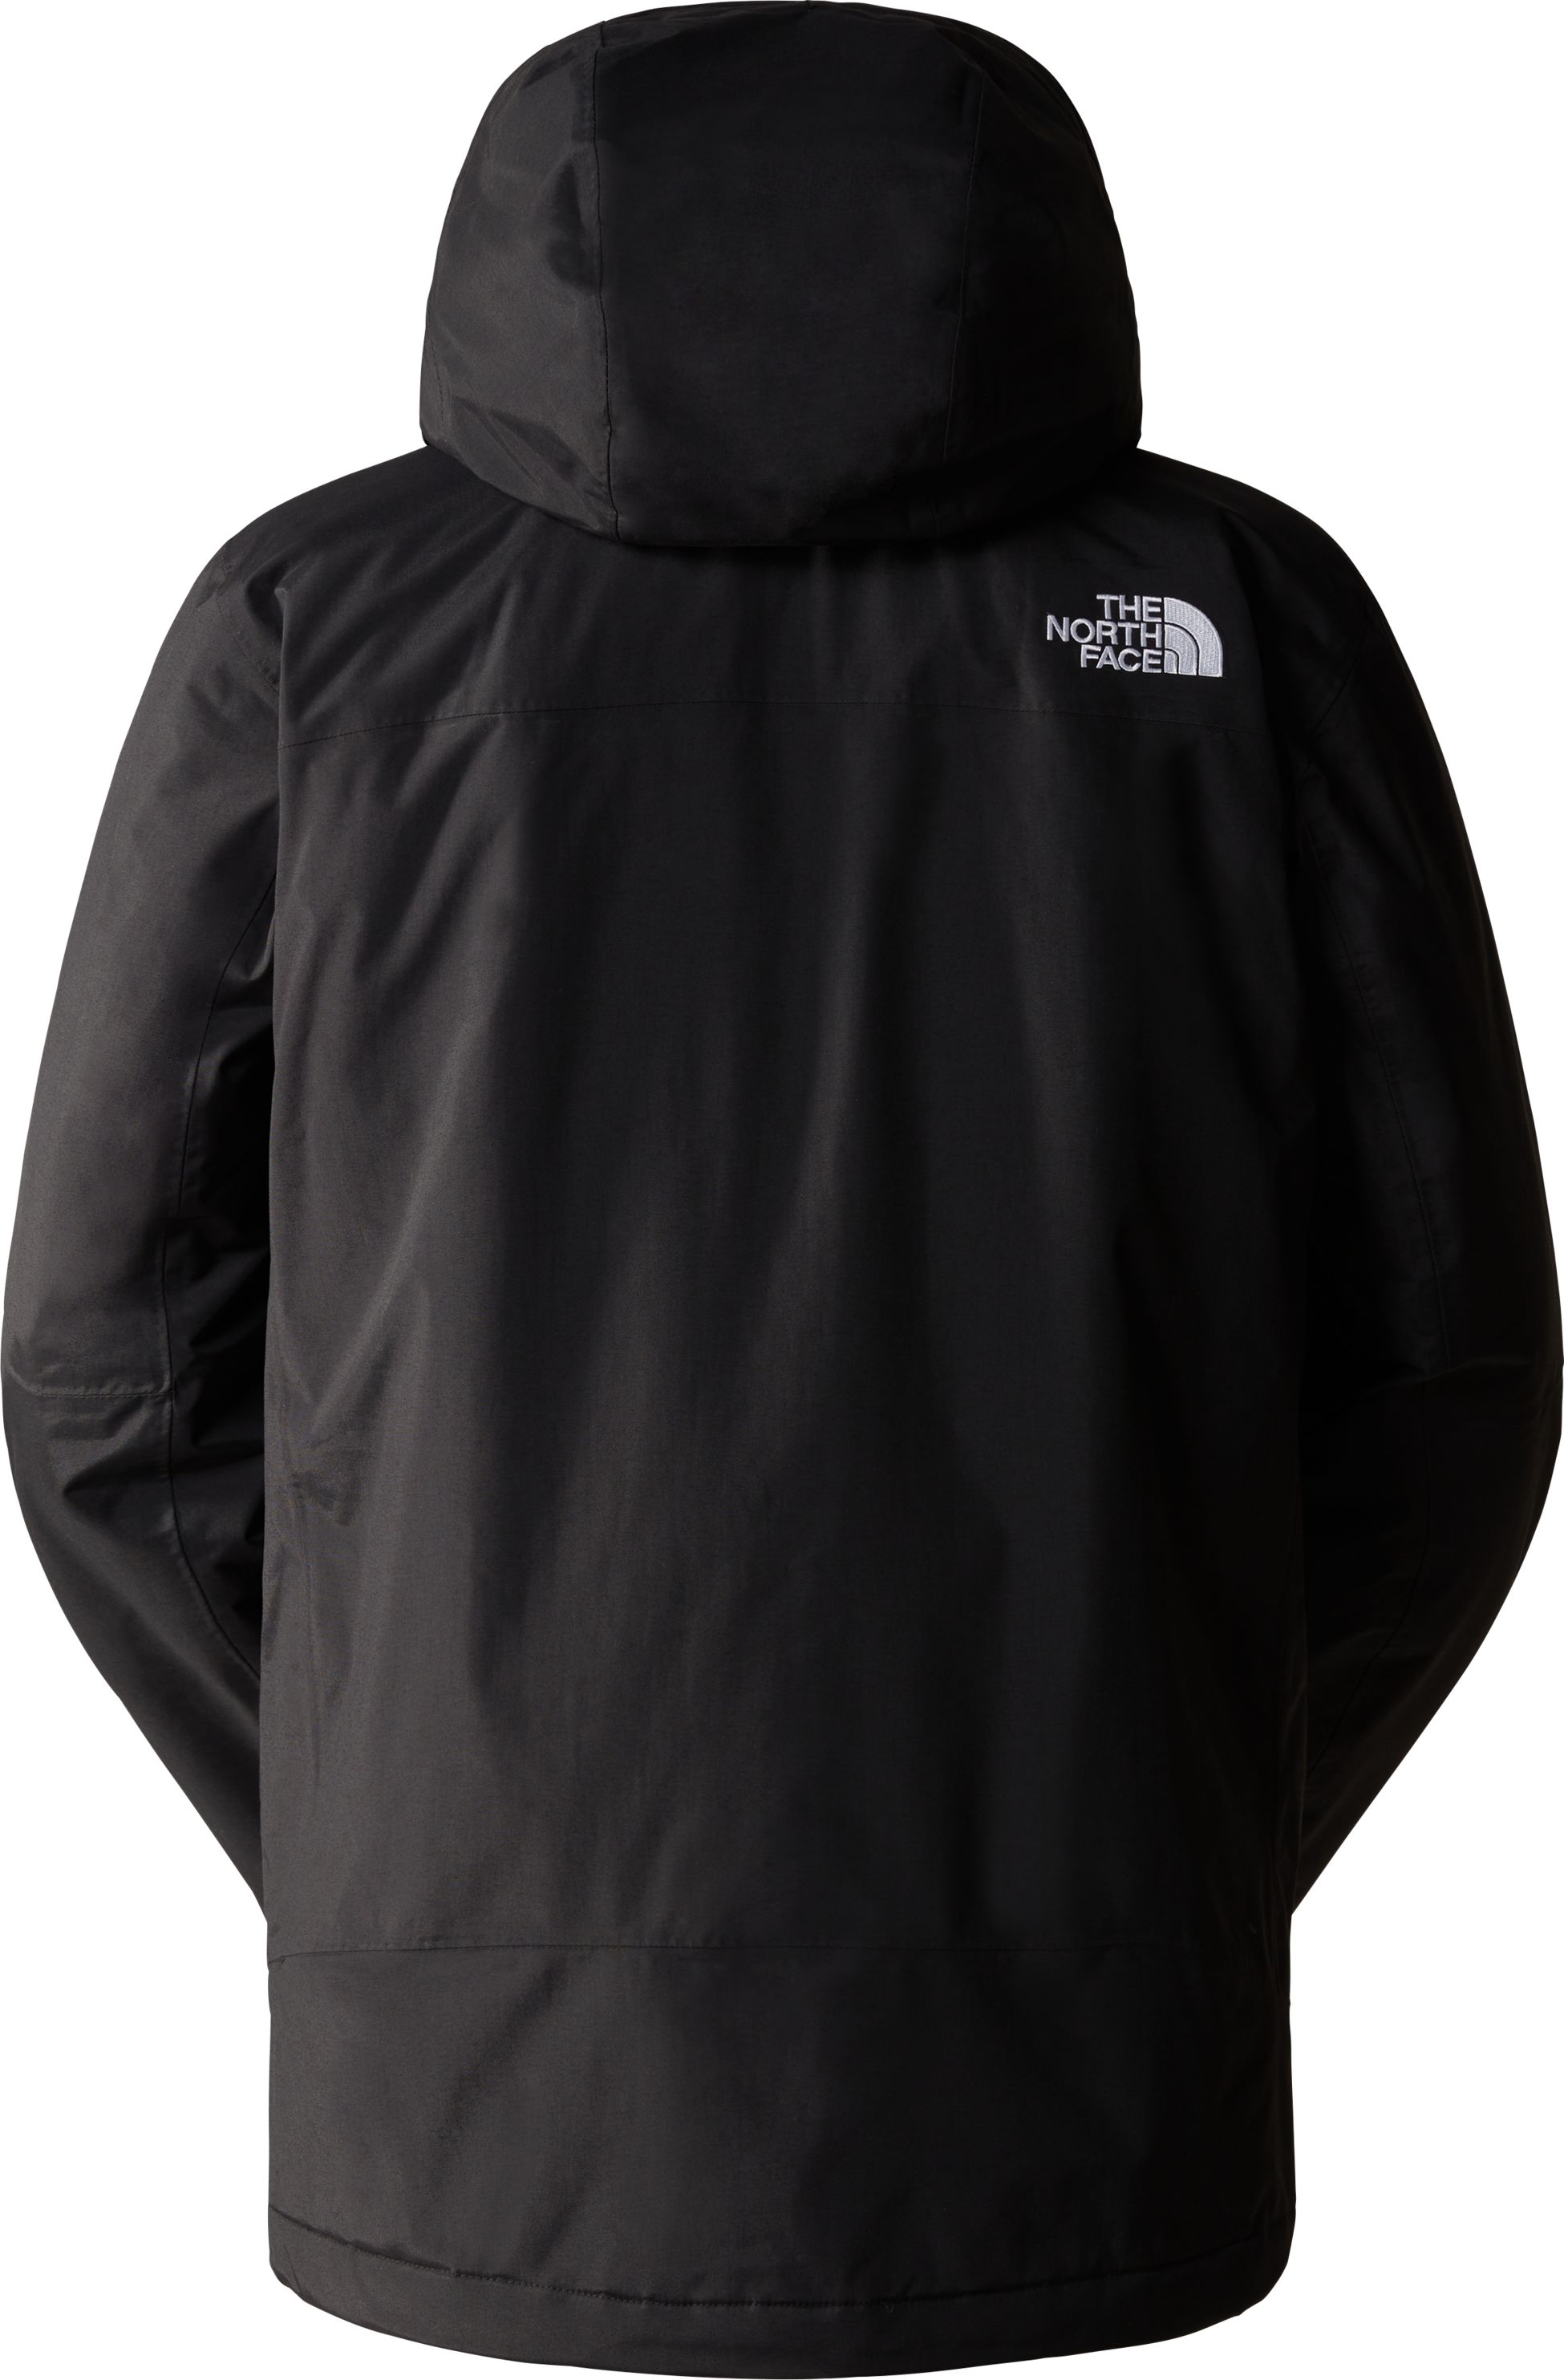 THE NORTH FACE, M FREEDOM INSULATED JACKET